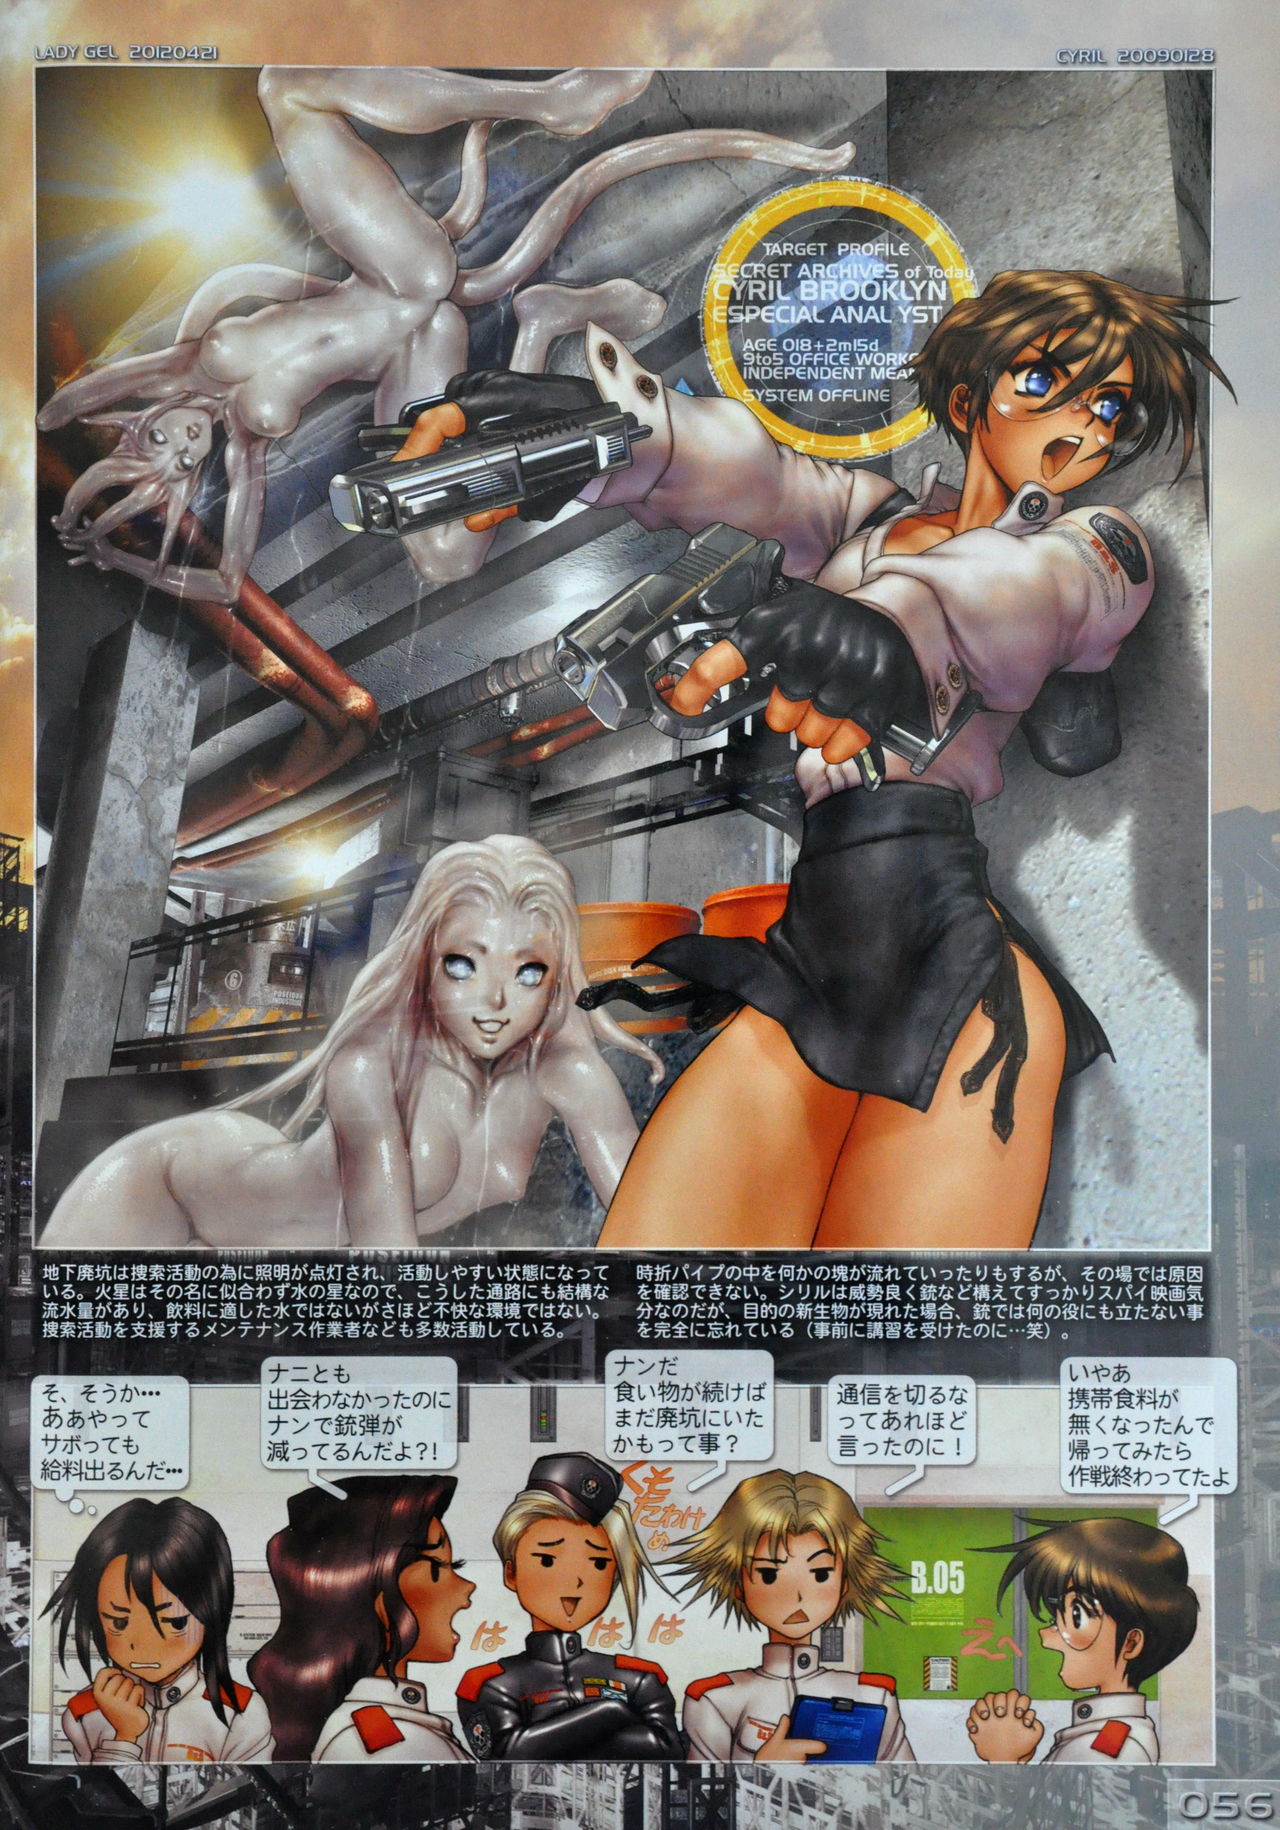 [Masamune Shirow] W-Tails Cat 2 [士郎正宗] W・TAILS CAT 2